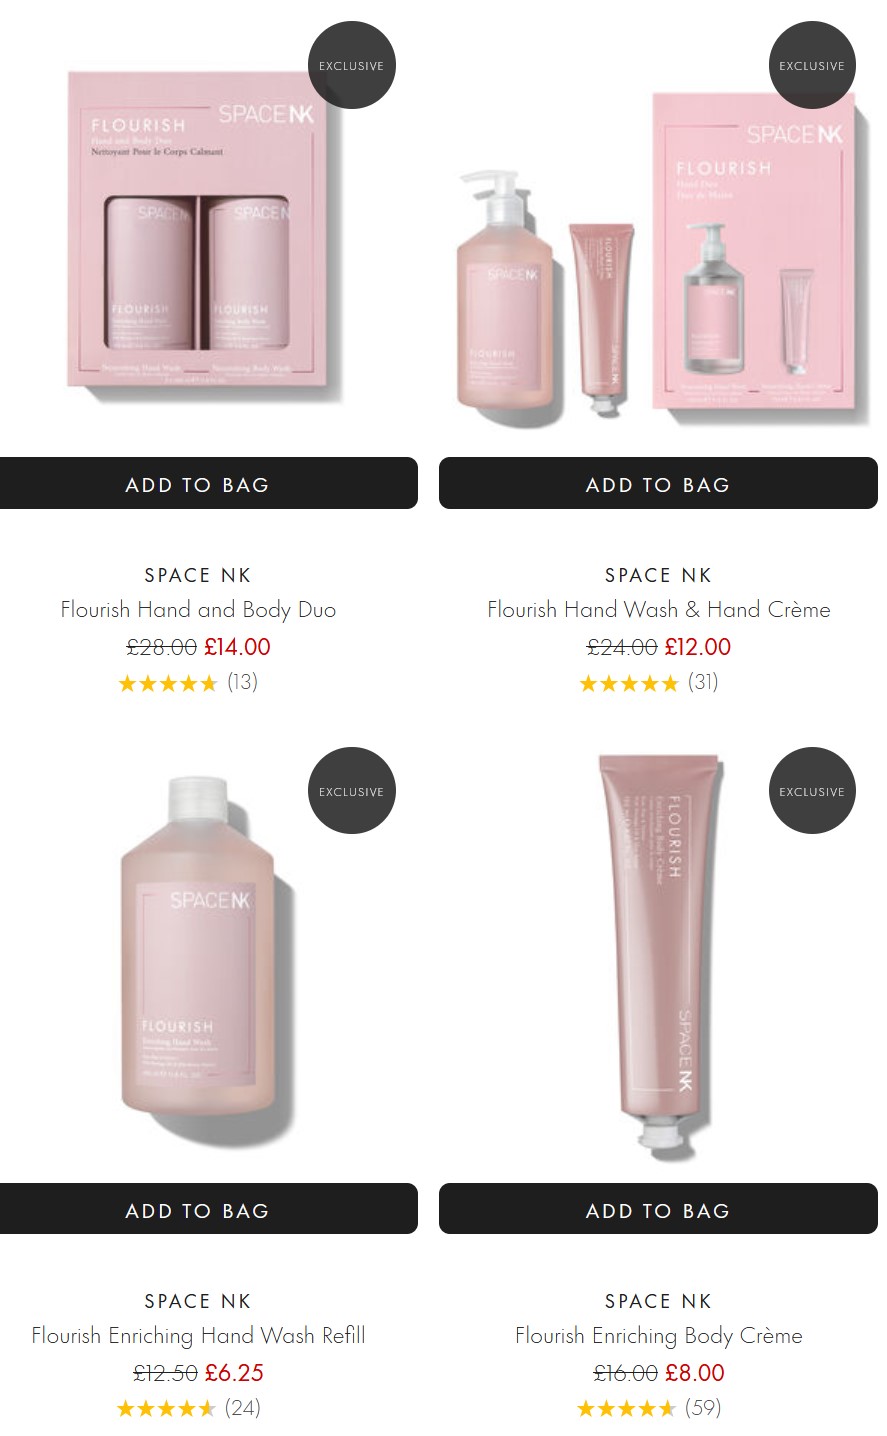 50% off Space NK Flourish Collection